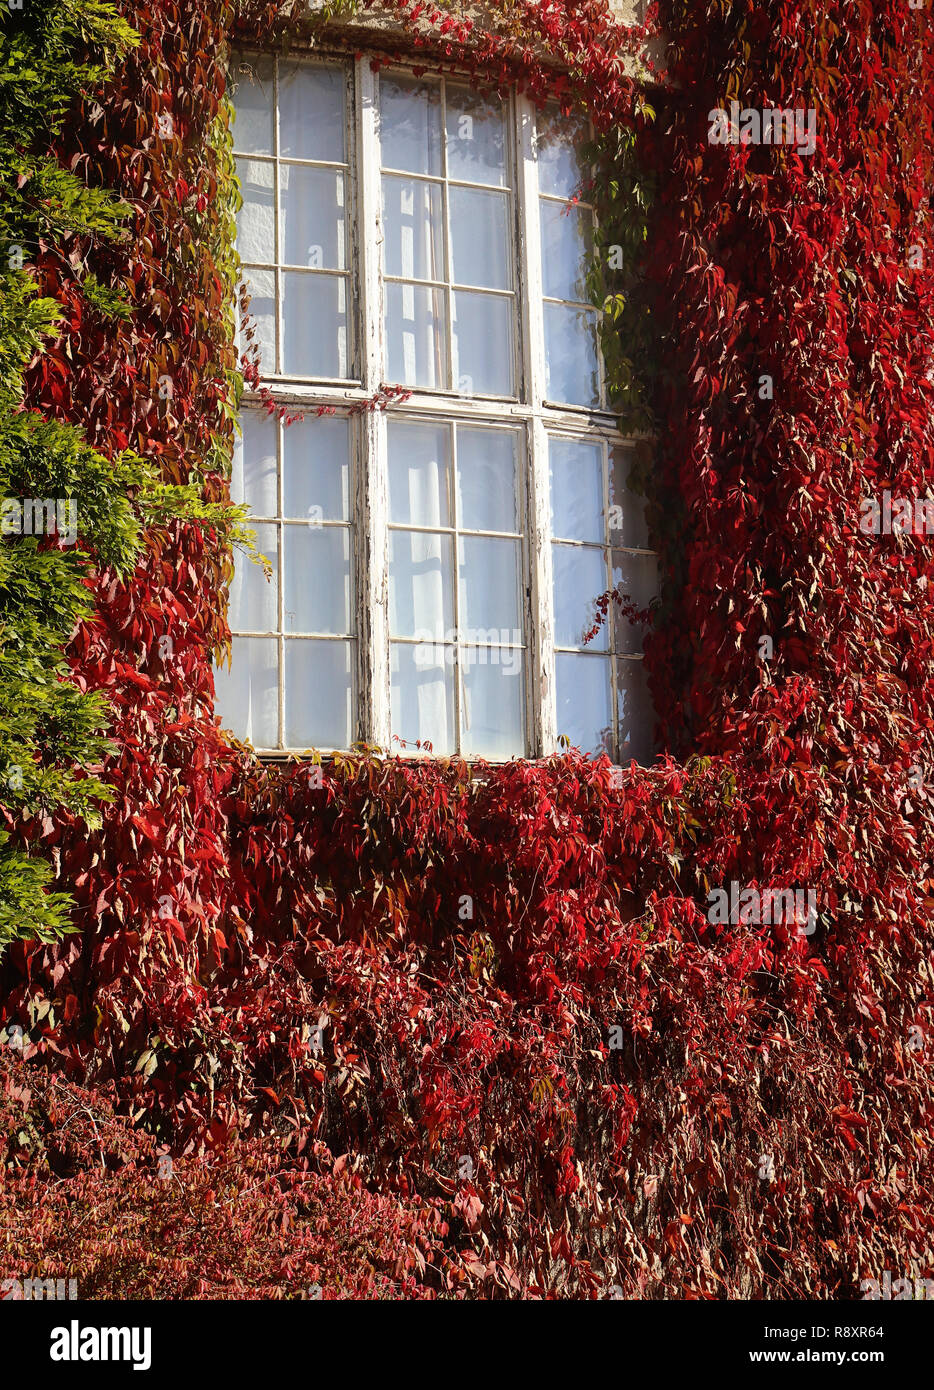 Autumnal view of house exterior wall covered by red foliage of creeper ivy Parthenocissus quinquefolia, framing a window Stock Photo